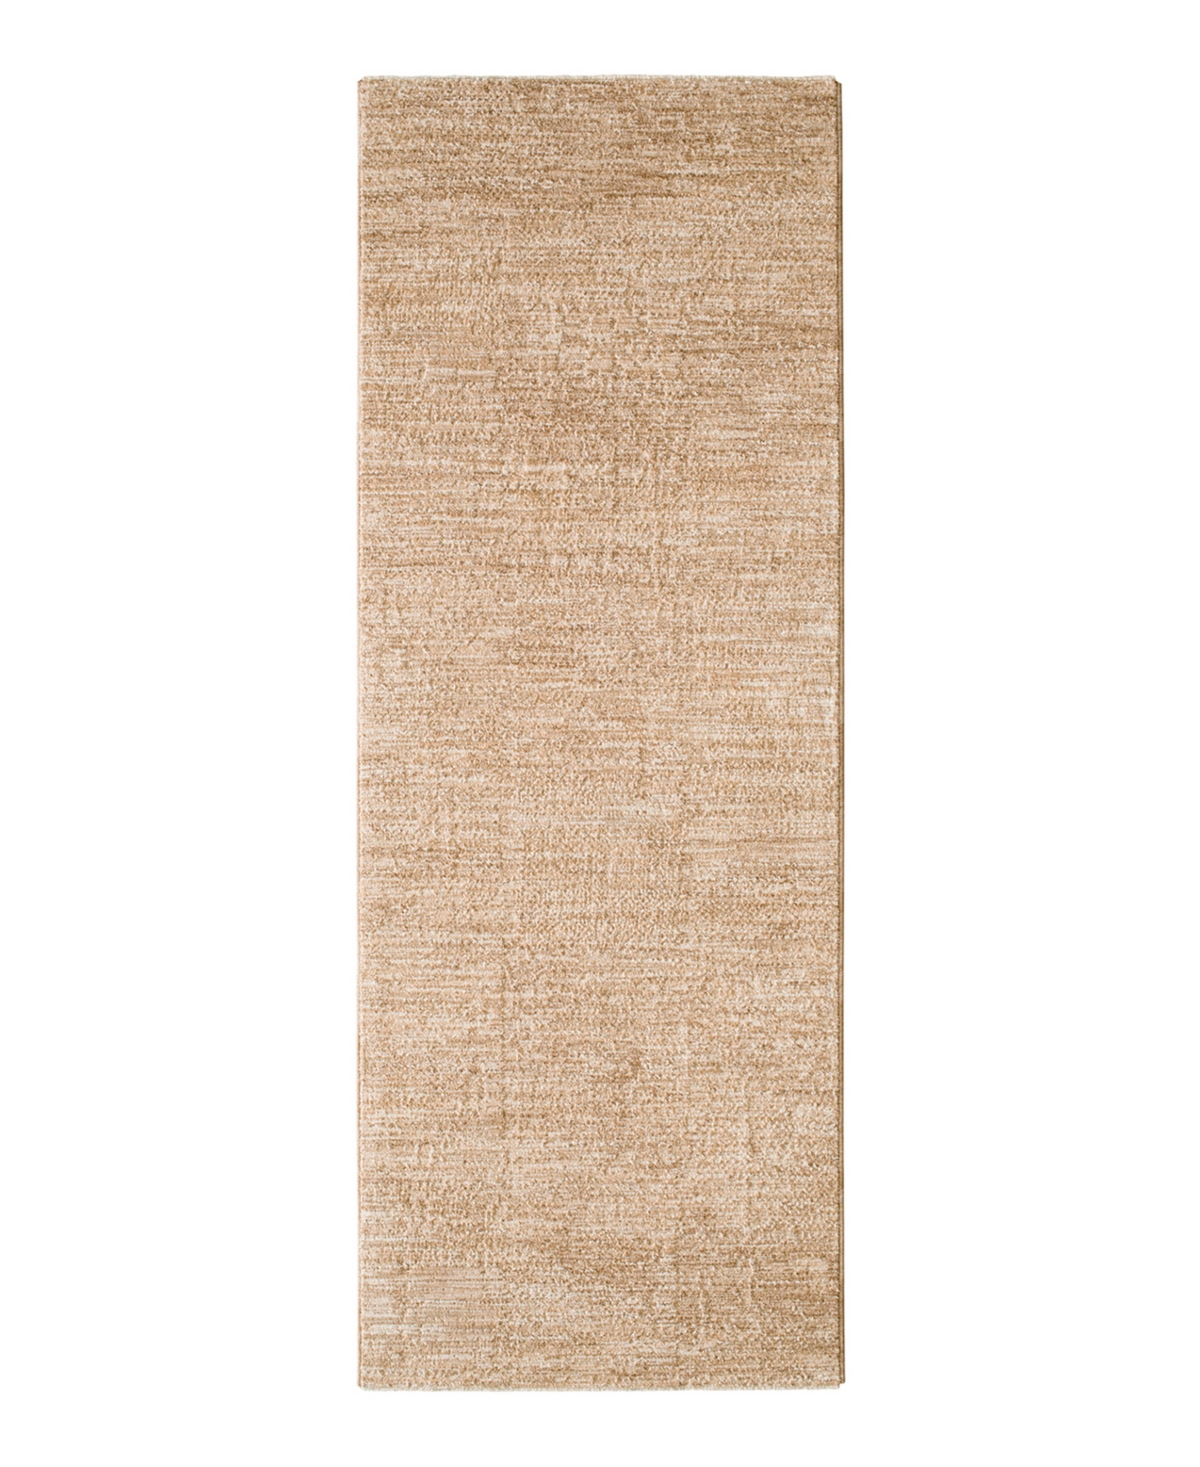 Surya Masterpiece High-Low Mpc-2320 2'8in x 10' Runner Area Rug - Tan